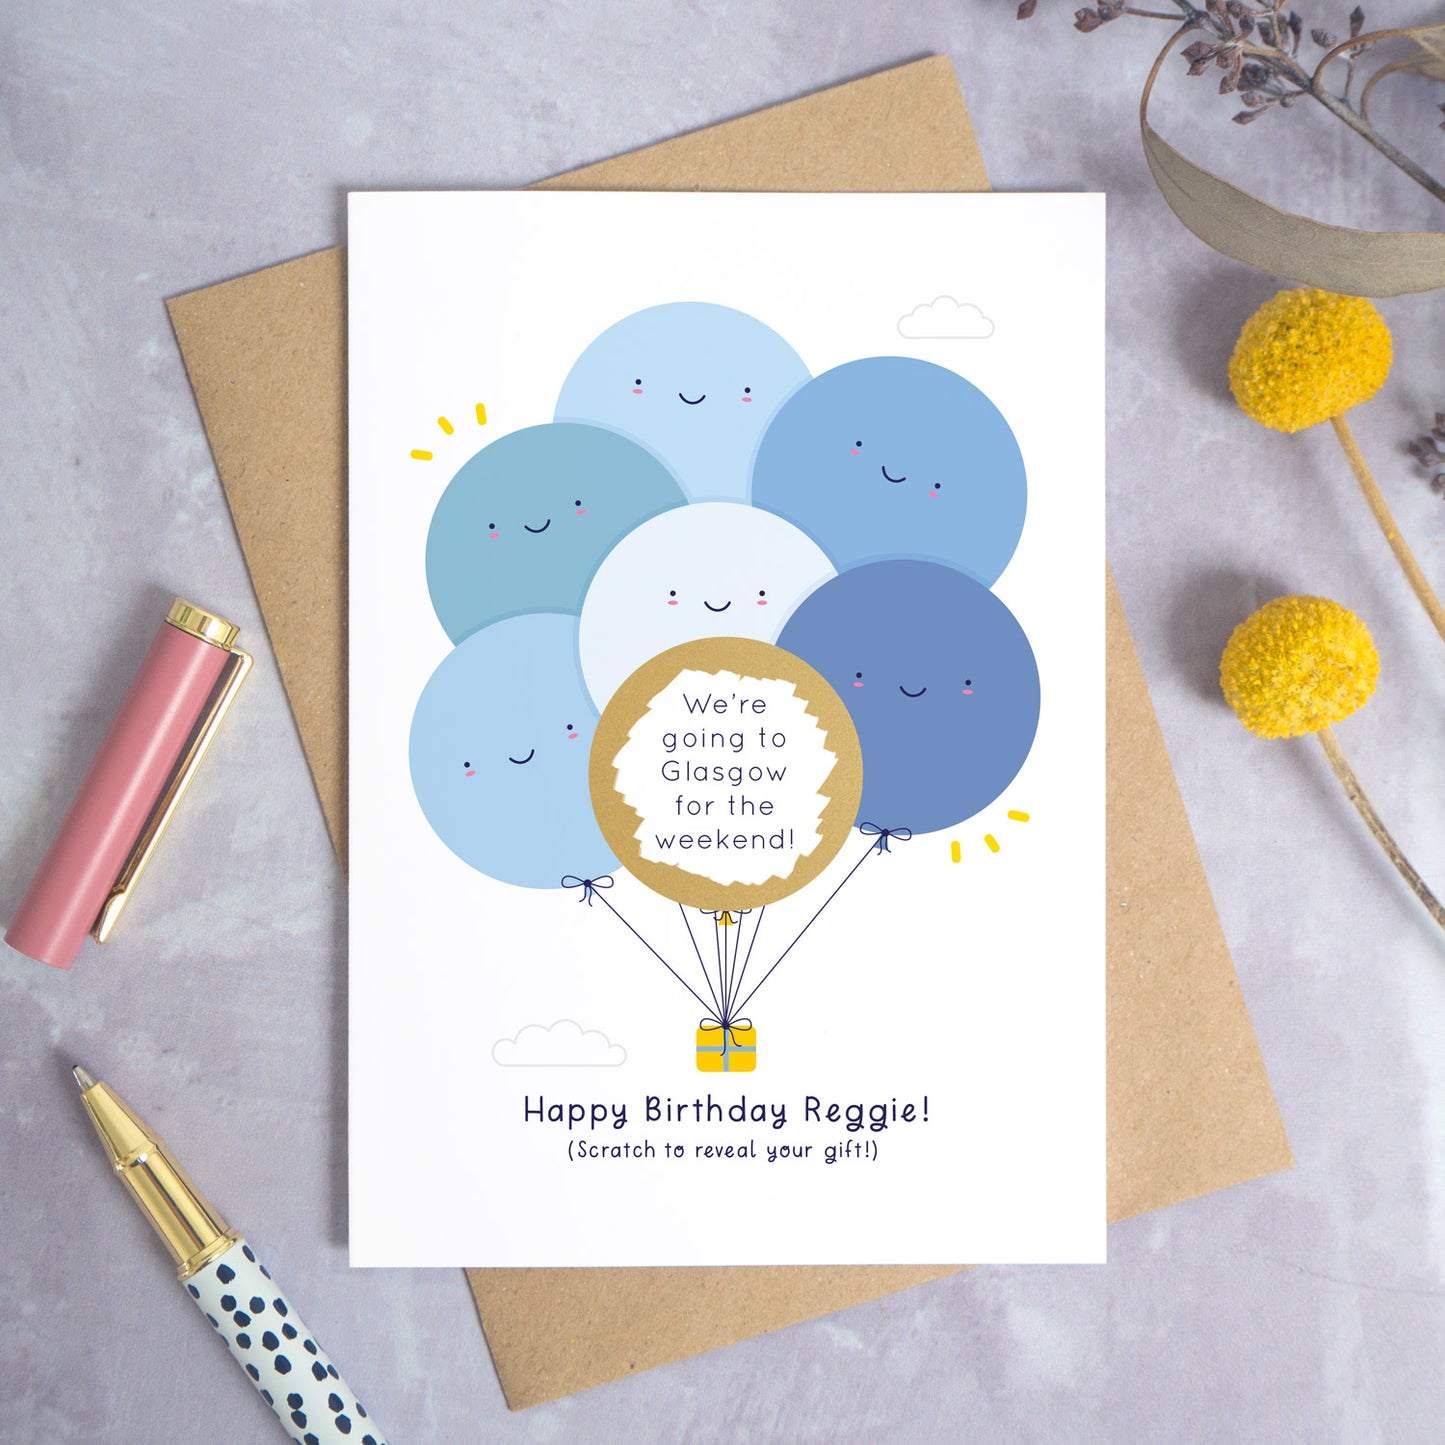 A ‘happy birthday’ scratch card photographed on a grey background with a pen on the left and yellow and purple flowers on the right. This is the blue version of the card after it has been scratched off.